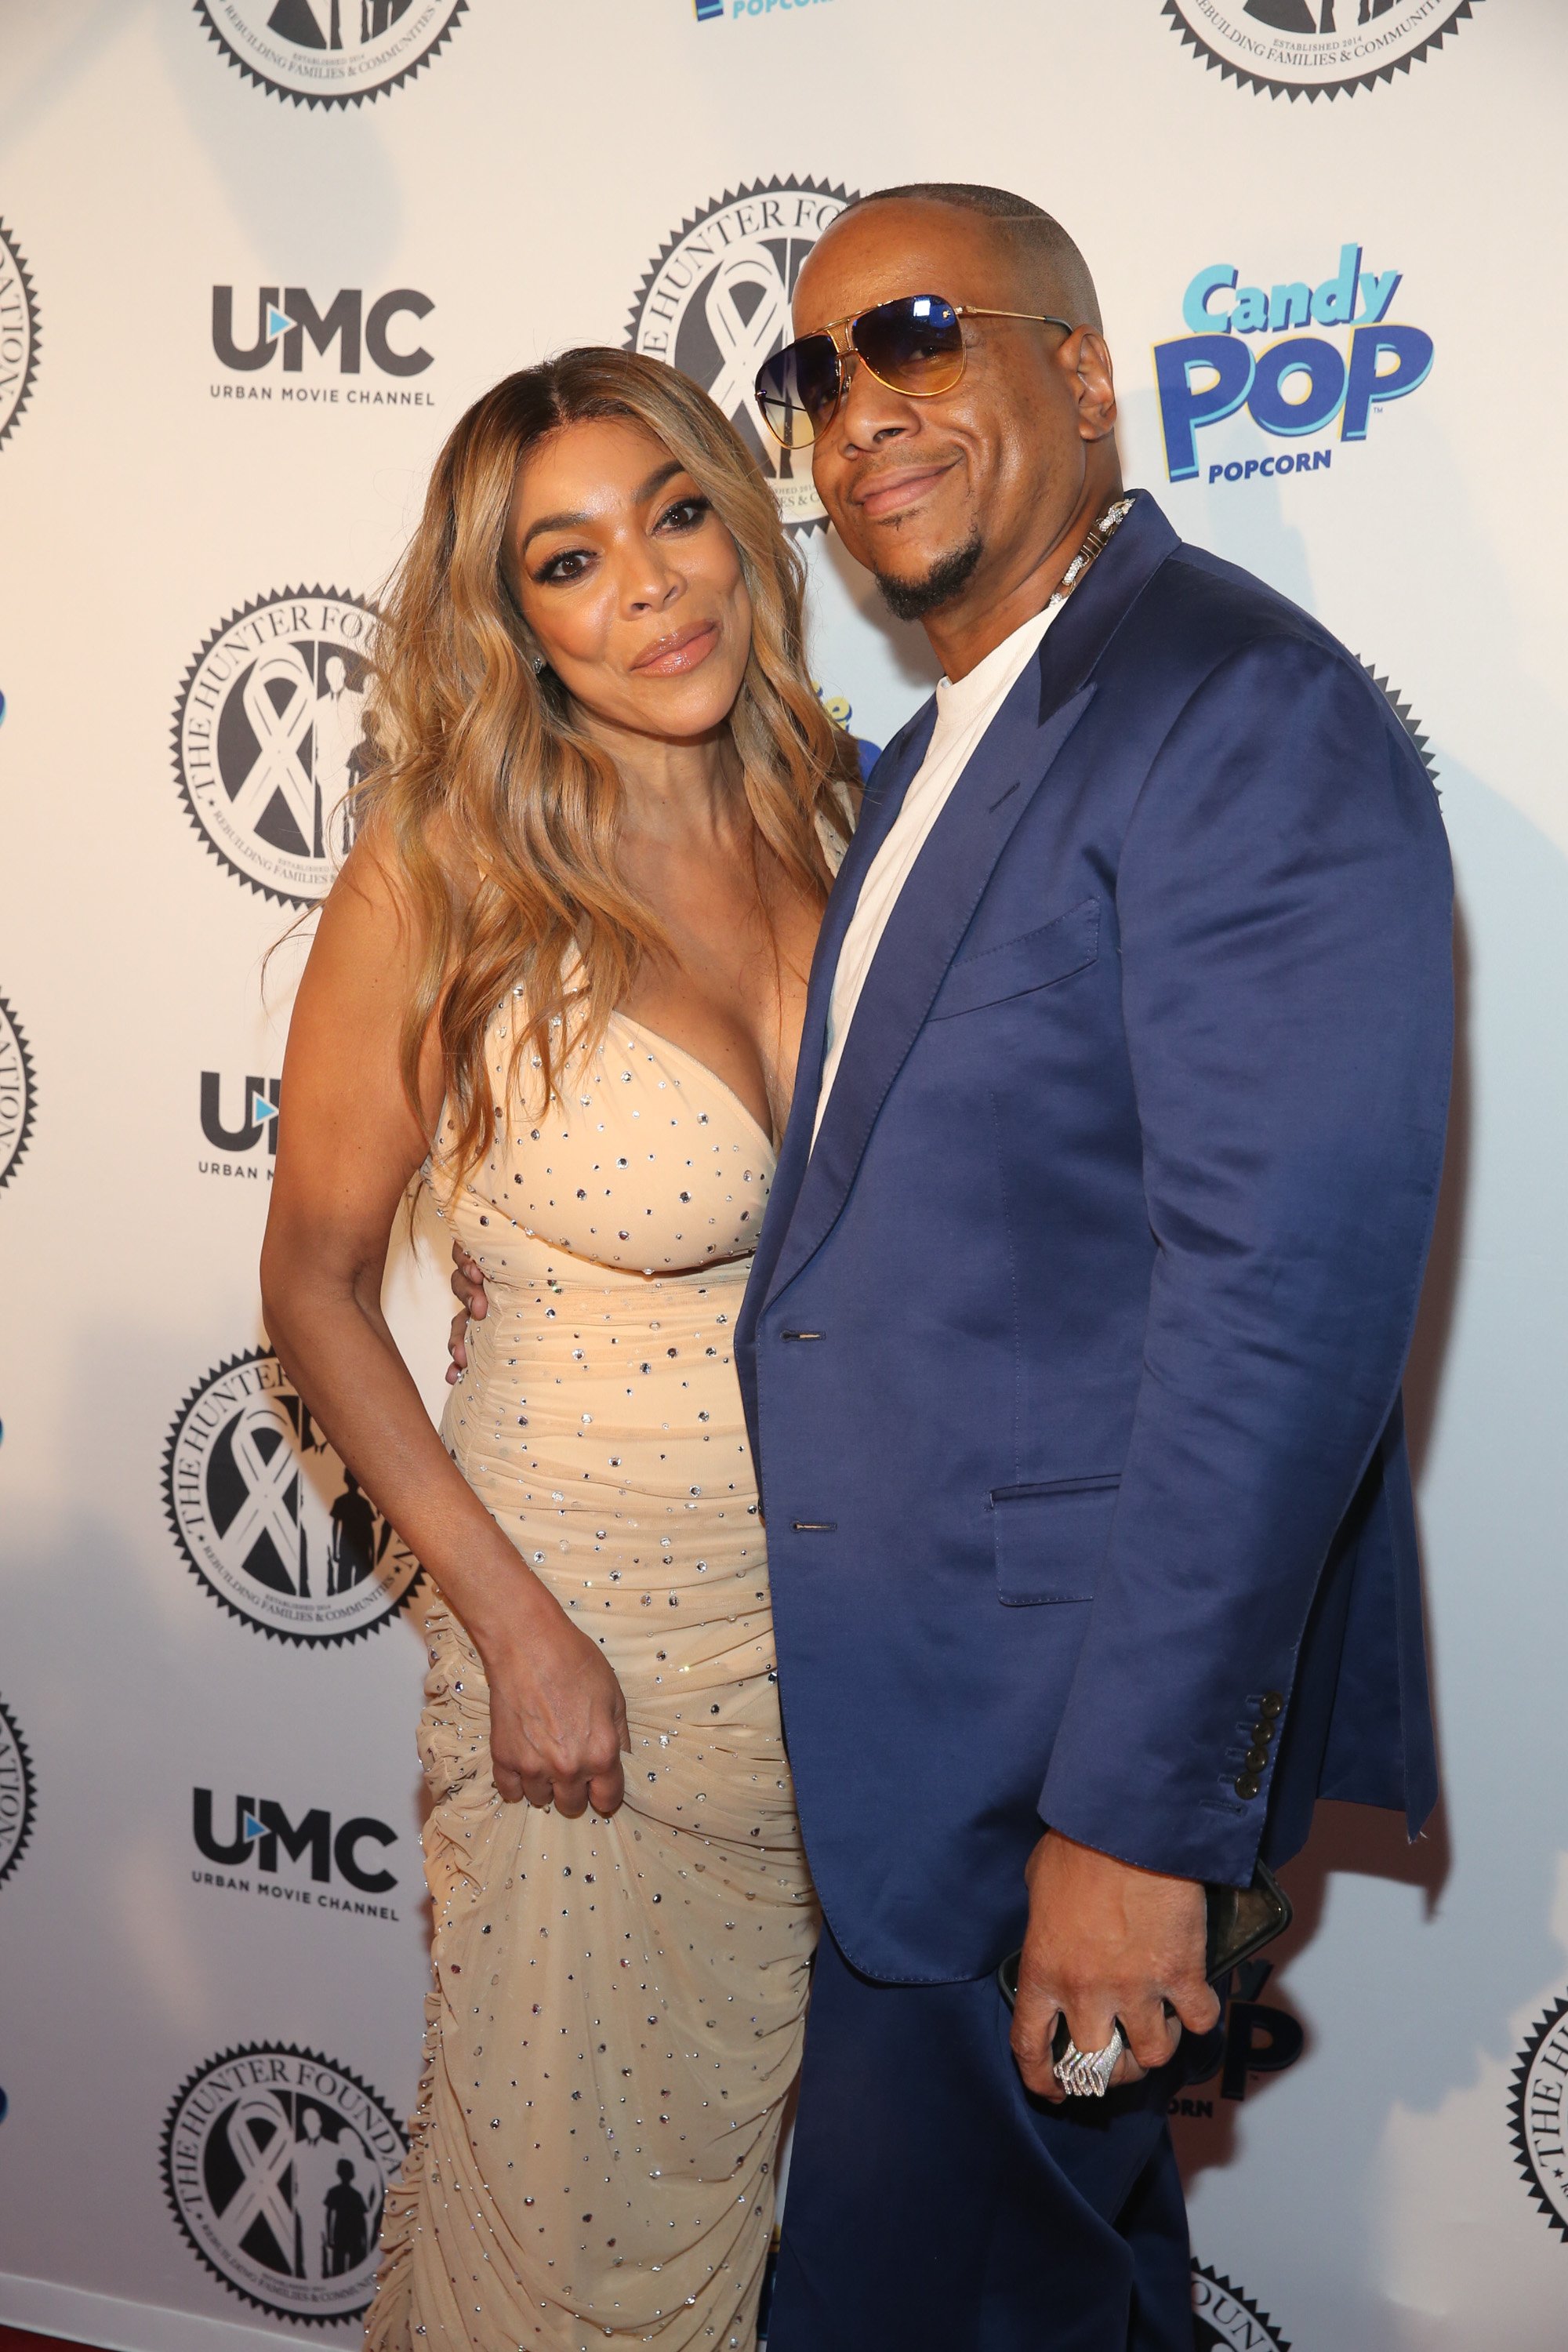 Wendy Williams and Kevin Hunter at The Hunter Foundation gala on July 18, 2018 at the Hammerstein Ballroom in New York. | Source: Getty Images